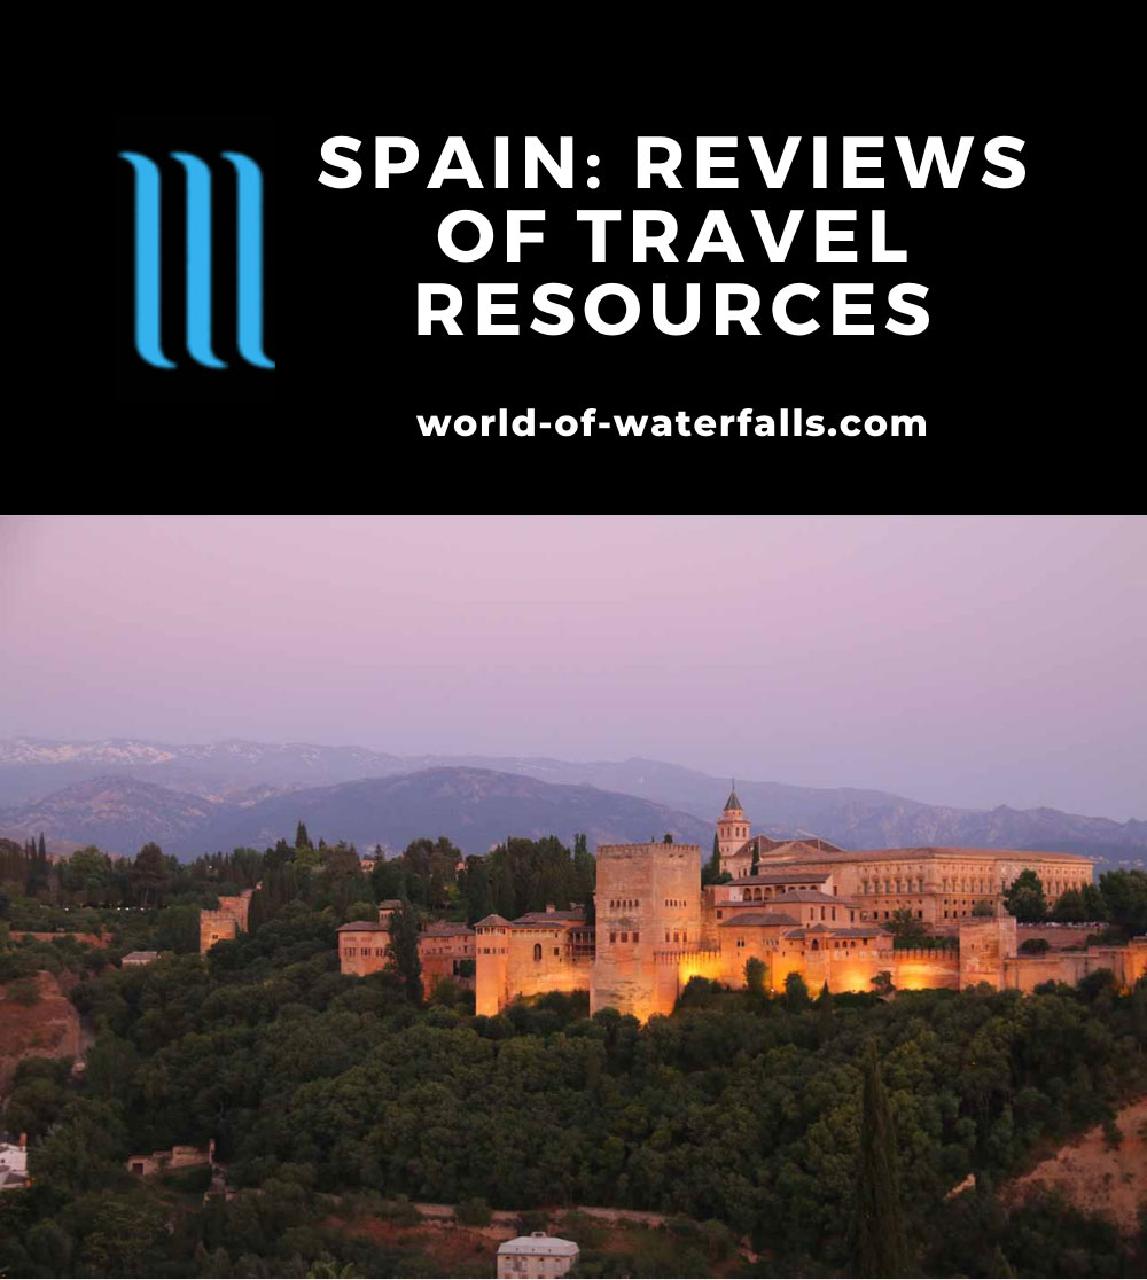 Spain: Reviews of Travel Resources